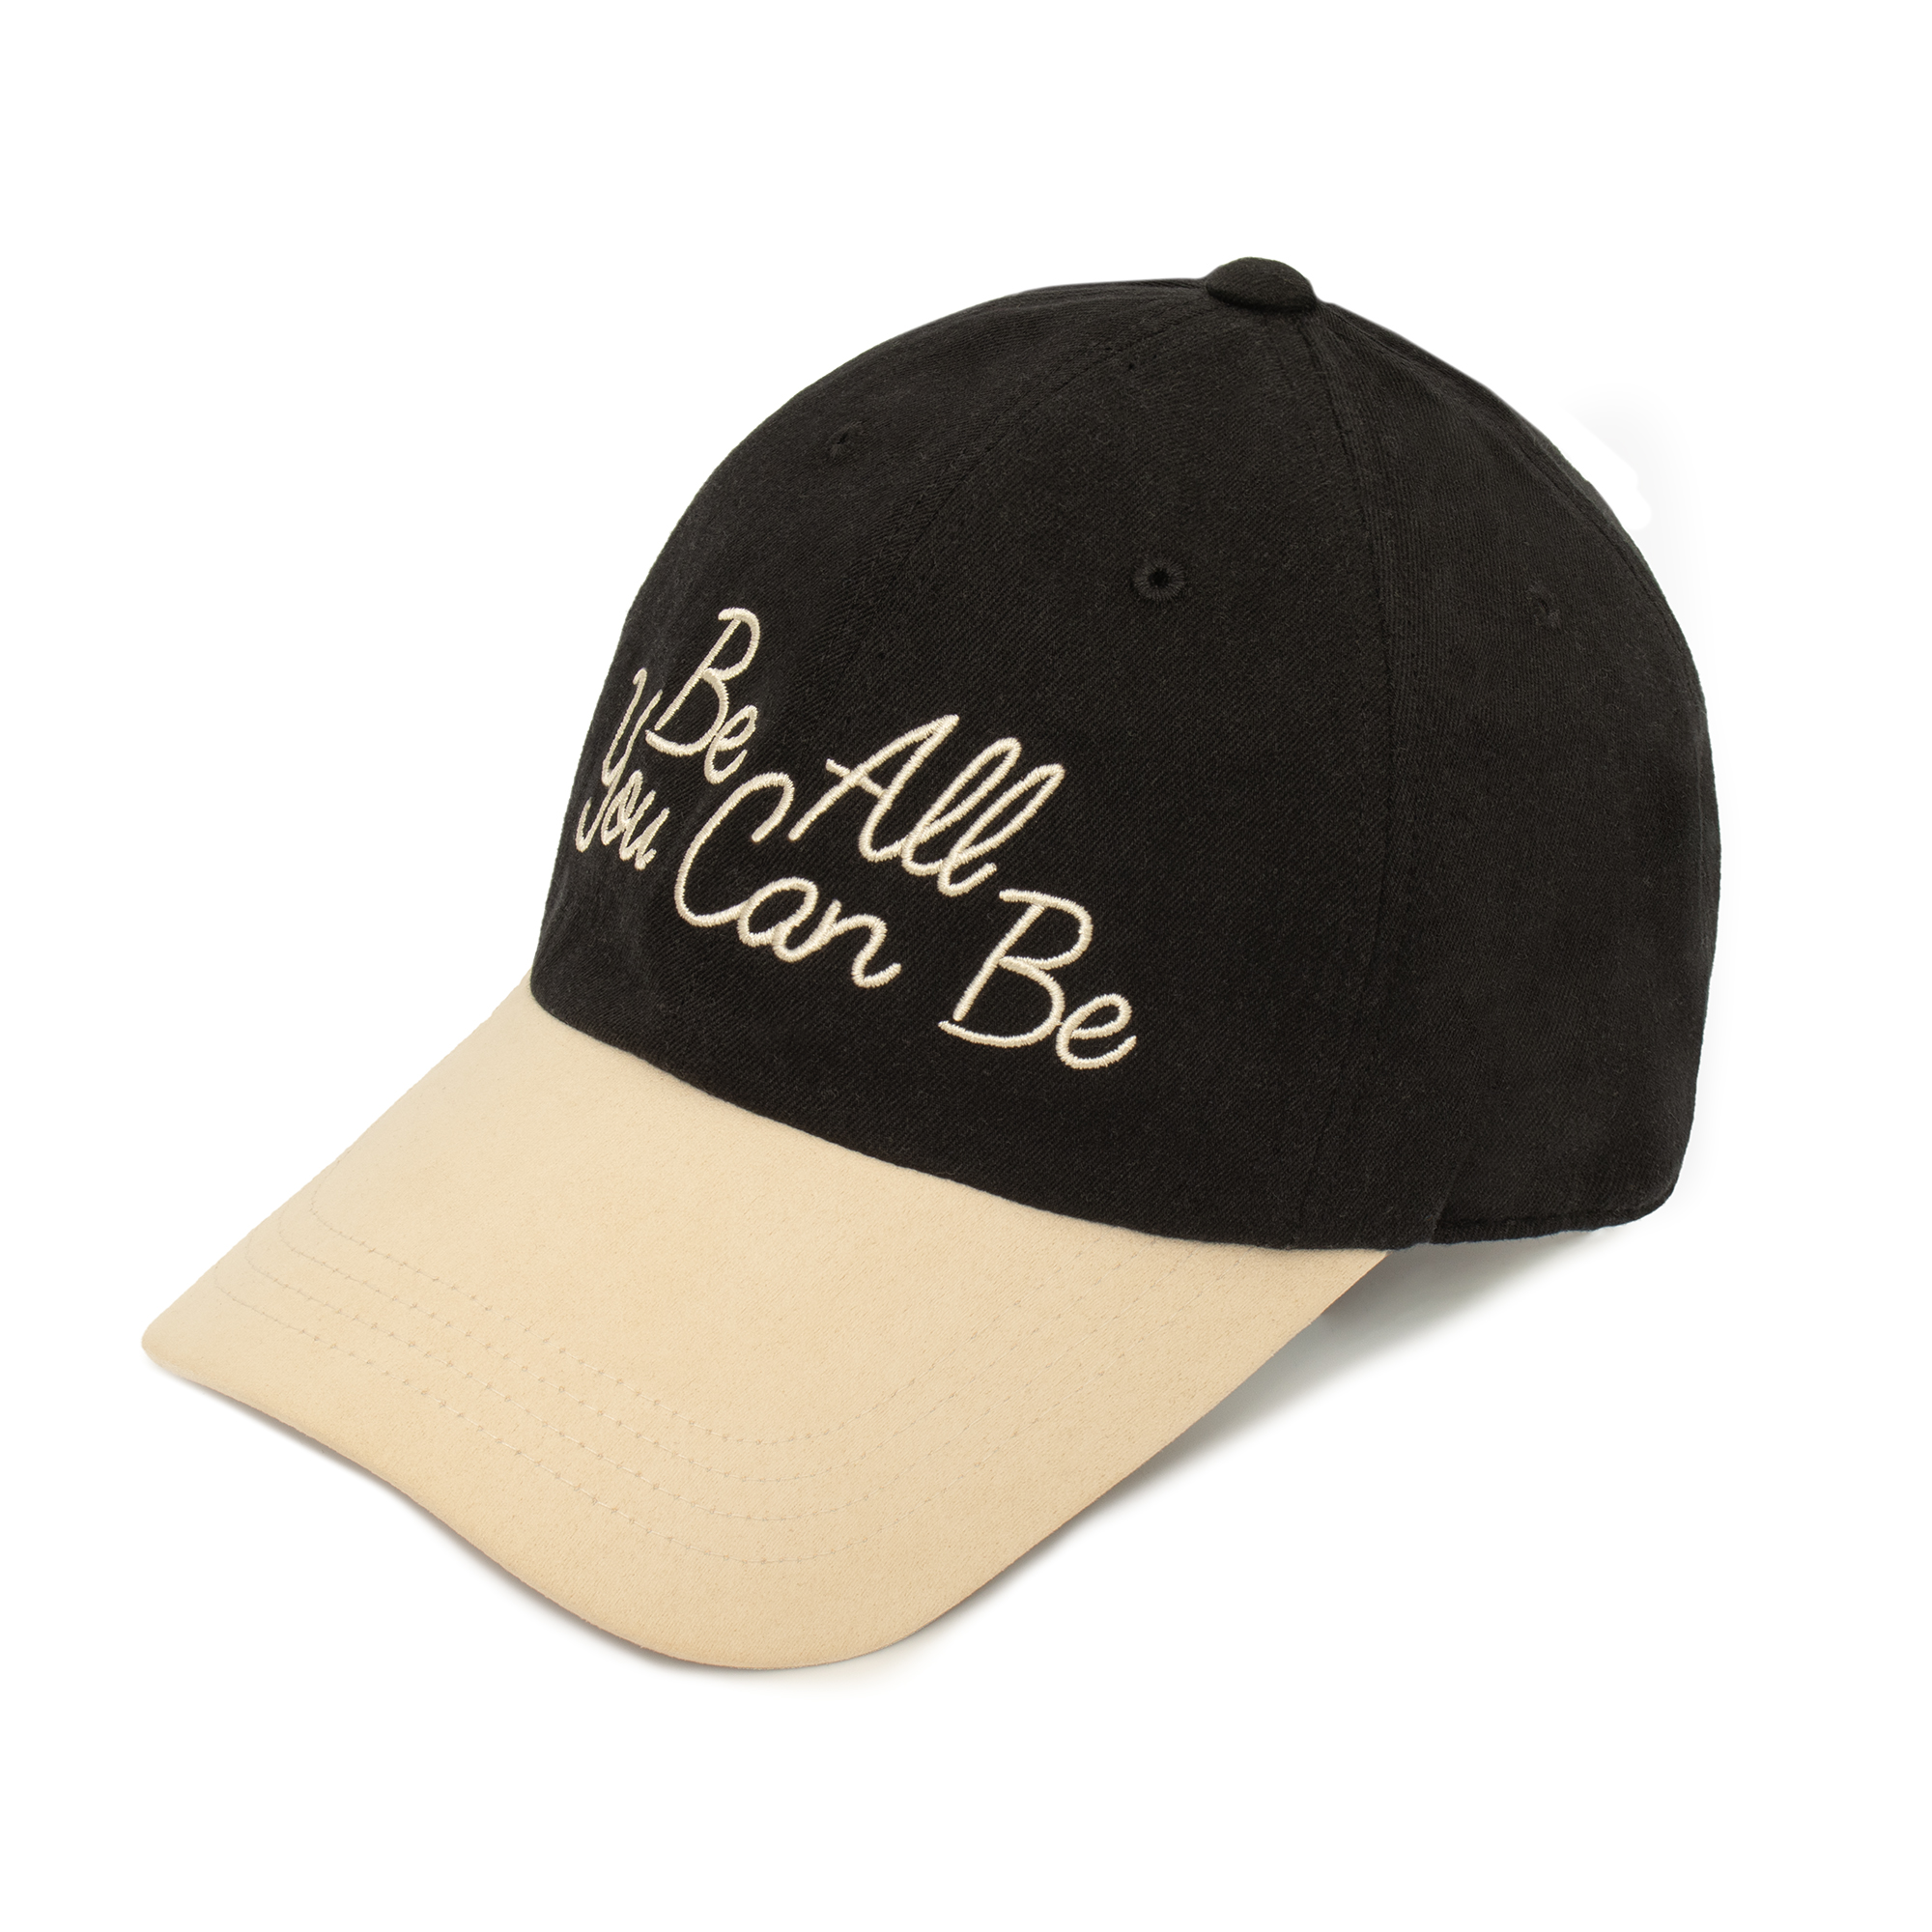 HW-BC164 : “Be All You Can Be” Suede Brim CapㅣBlack Ivory